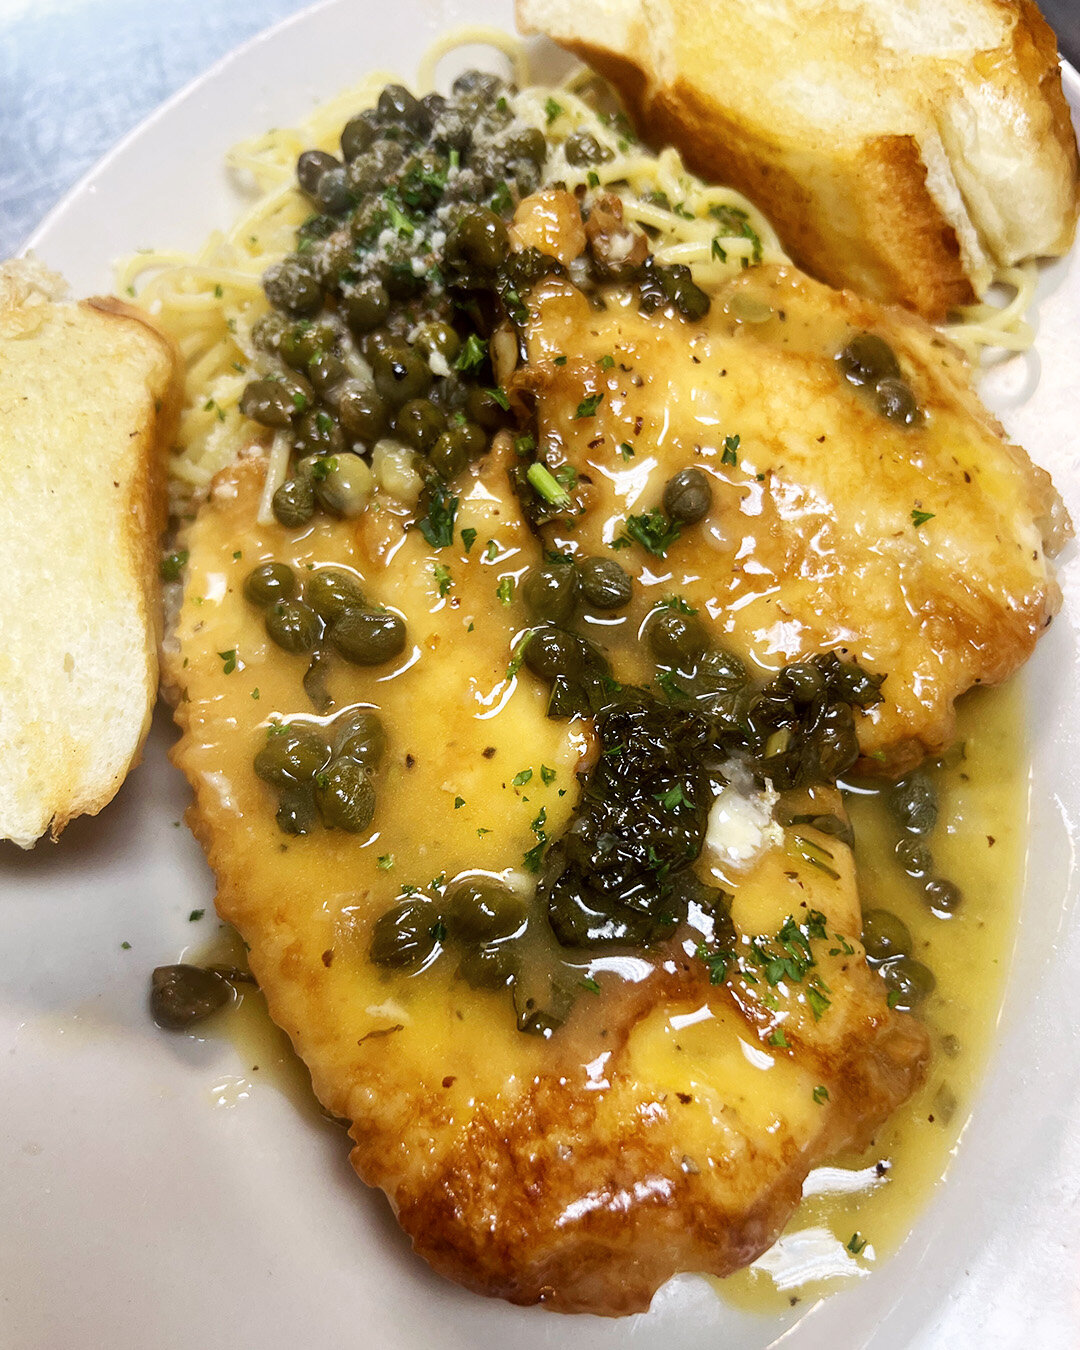 Weekend Dinnertime done right! 

⚫ Chicken Franchise 
Springer Mountain Chicken Breast egg dipped and saut&eacute;ed in a lemon, butter, white wine, caper sauce over spaghetti.